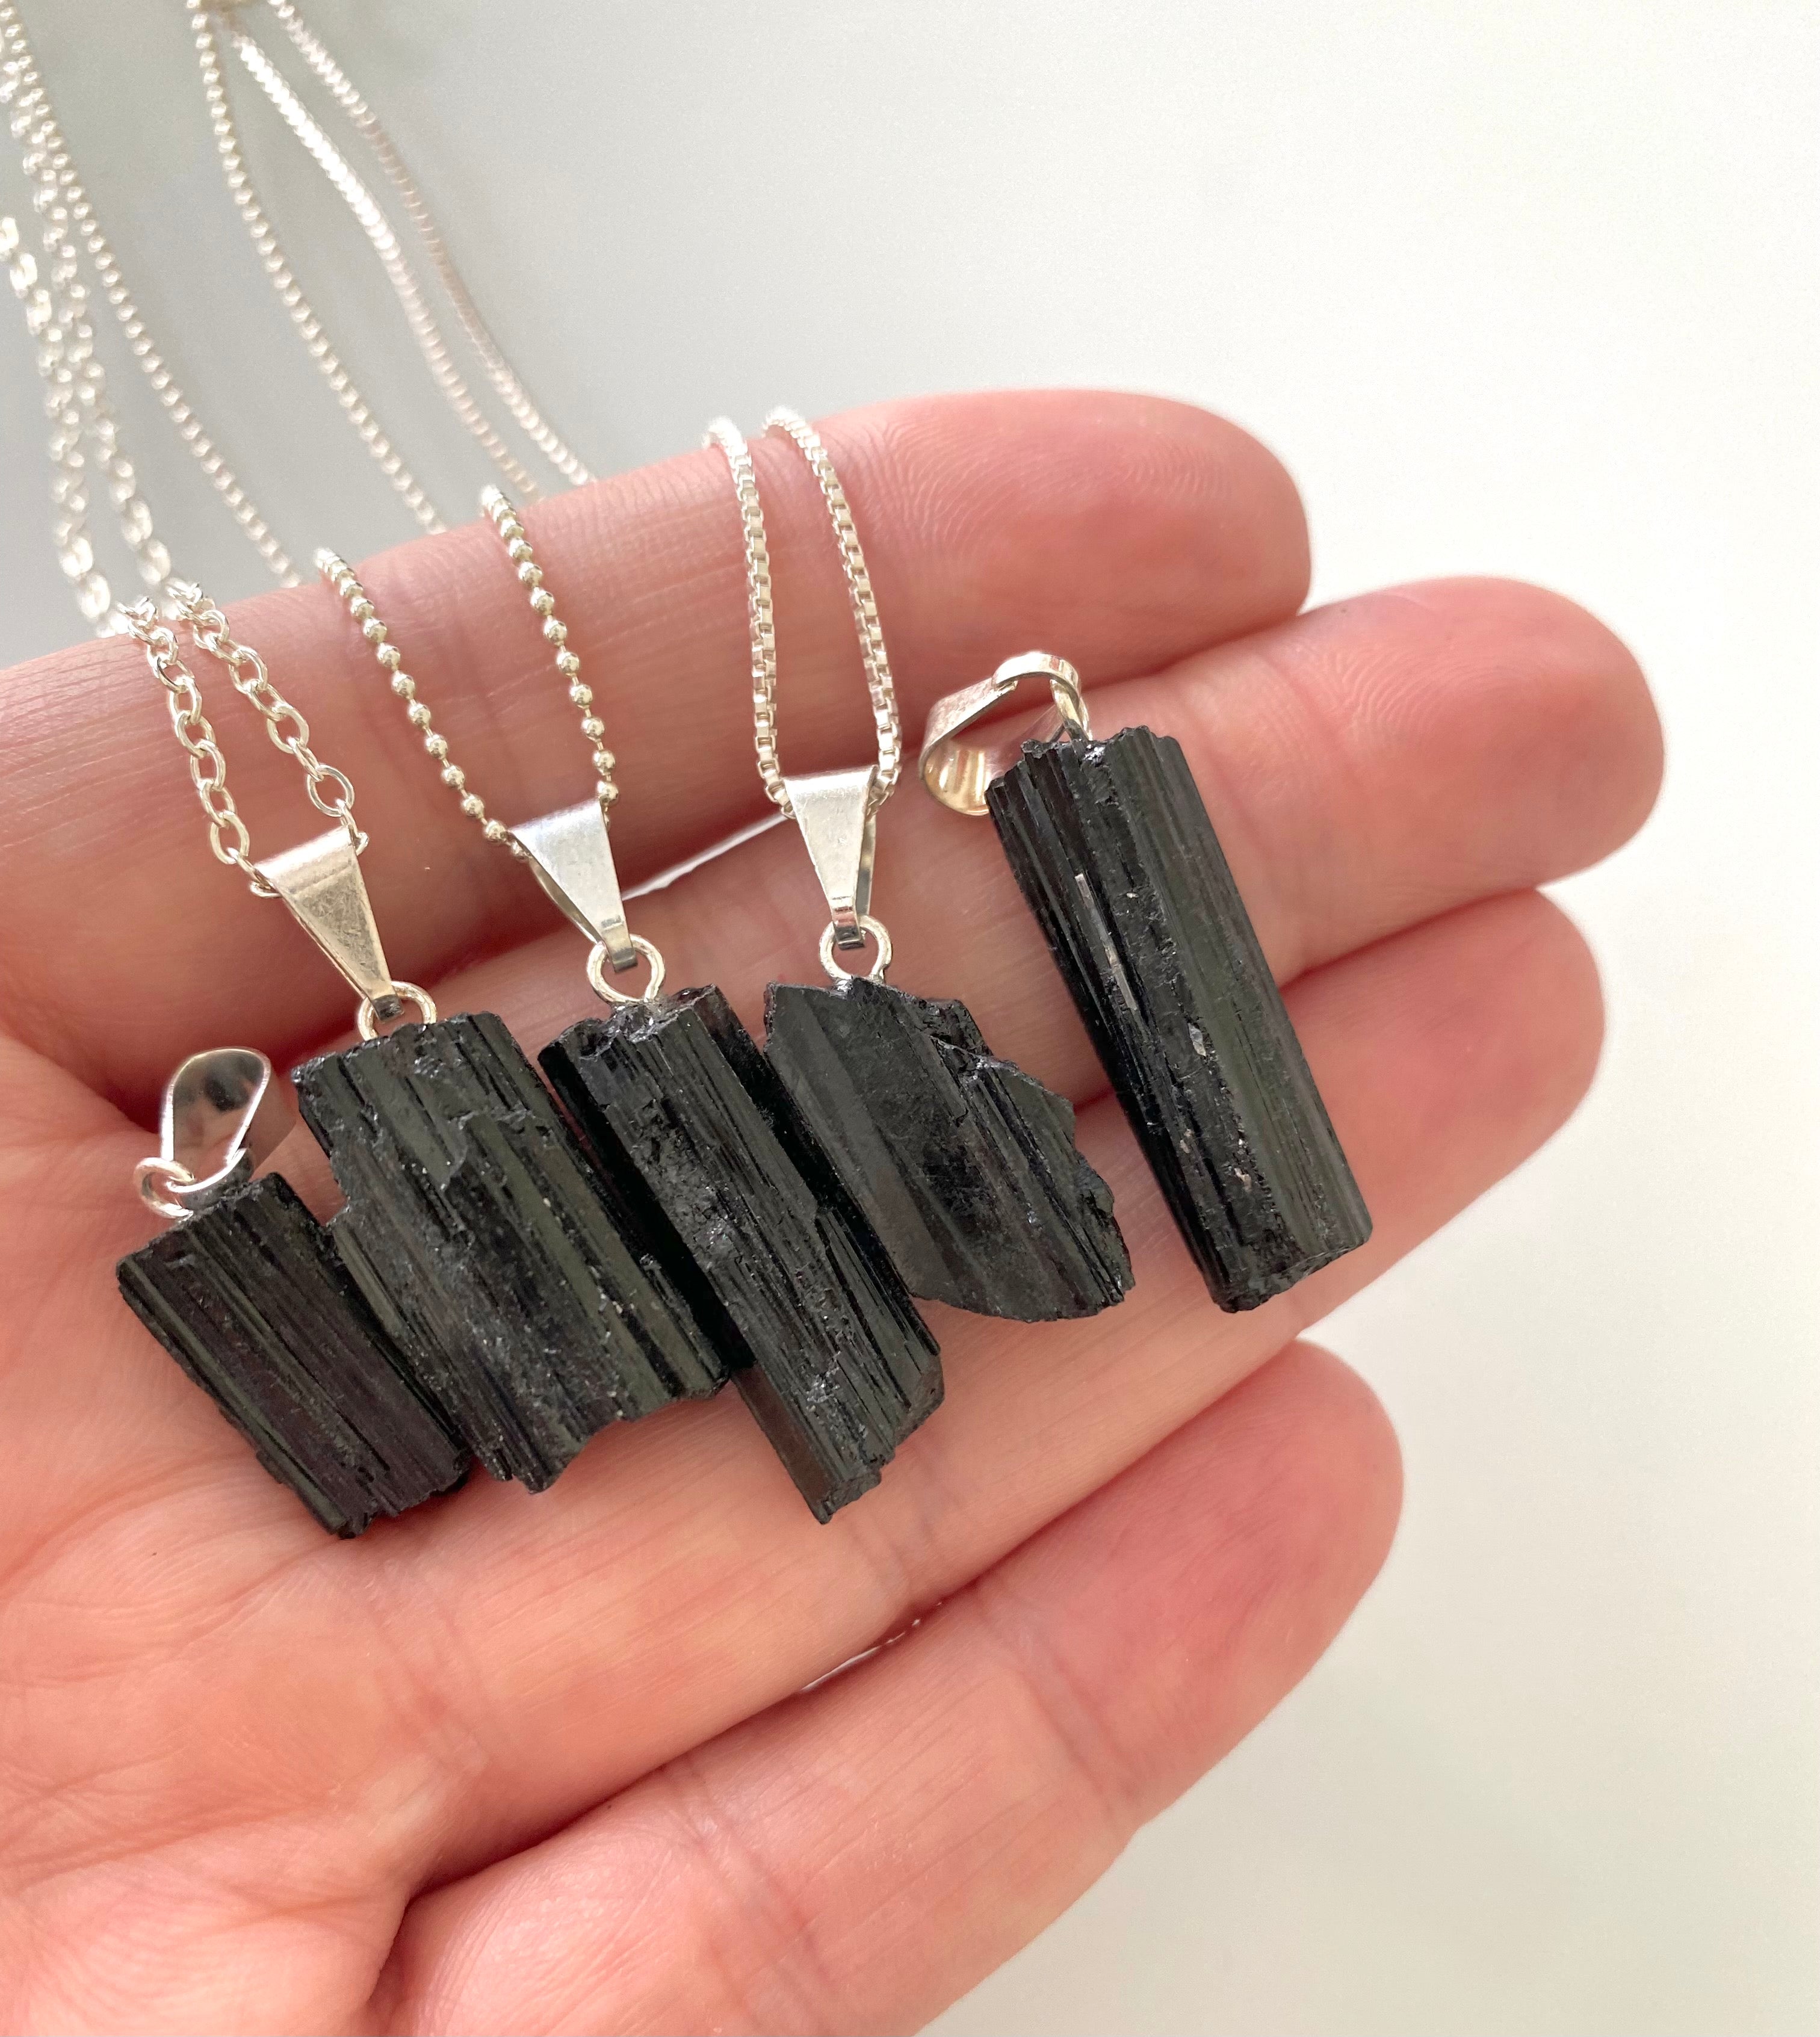 Raw Black Tourmaline Pendant Necklace - Sterling Silver Chain